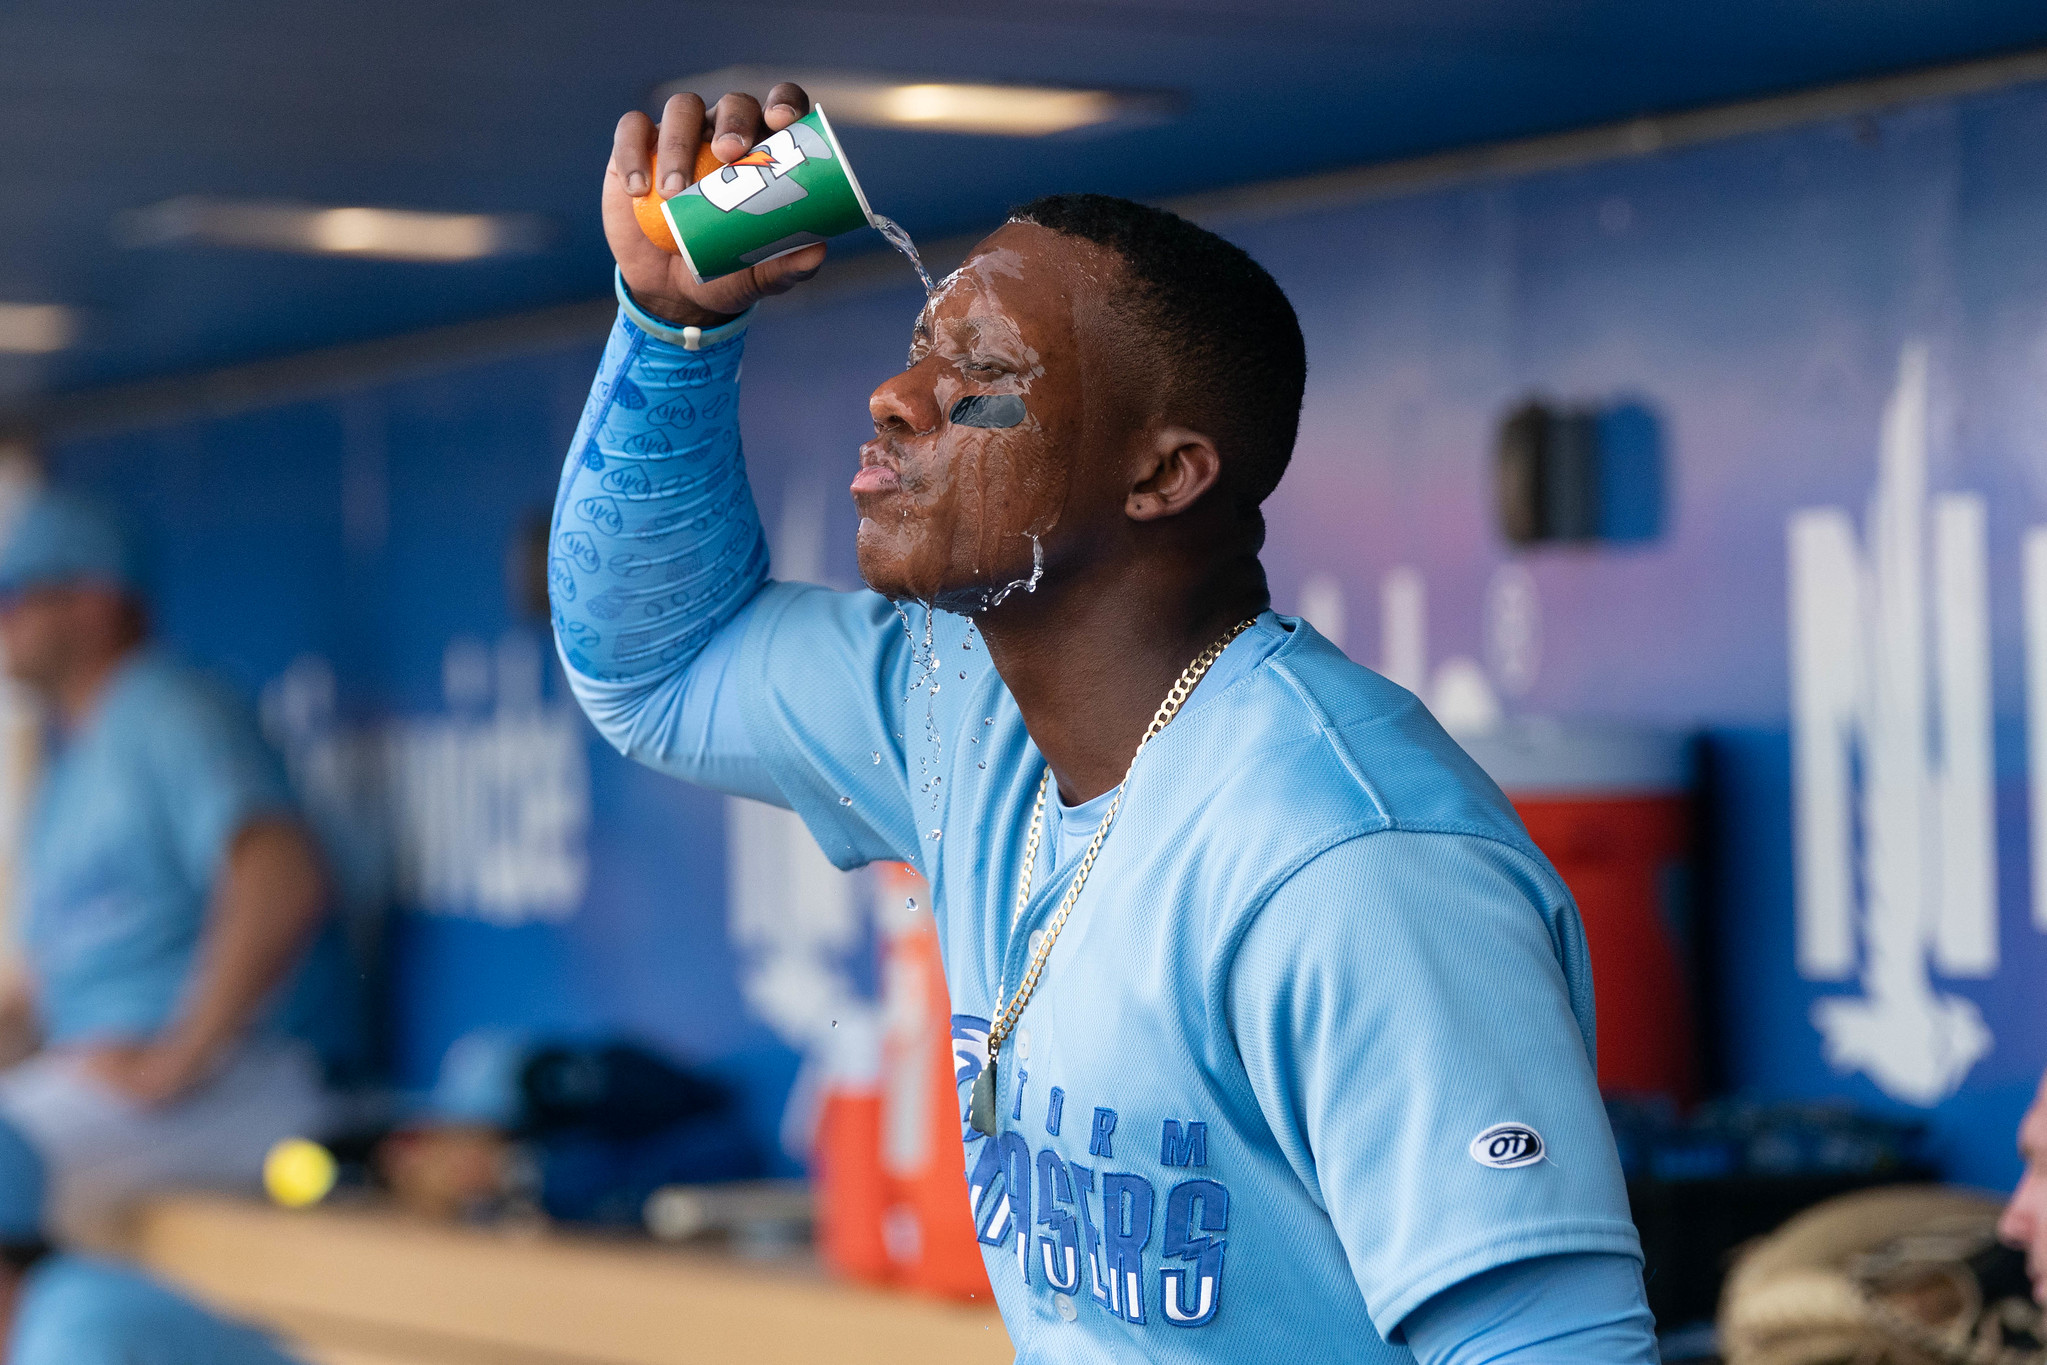 A baseball player in a light blue jersey pours water from a green Gatorade cup all over his face.